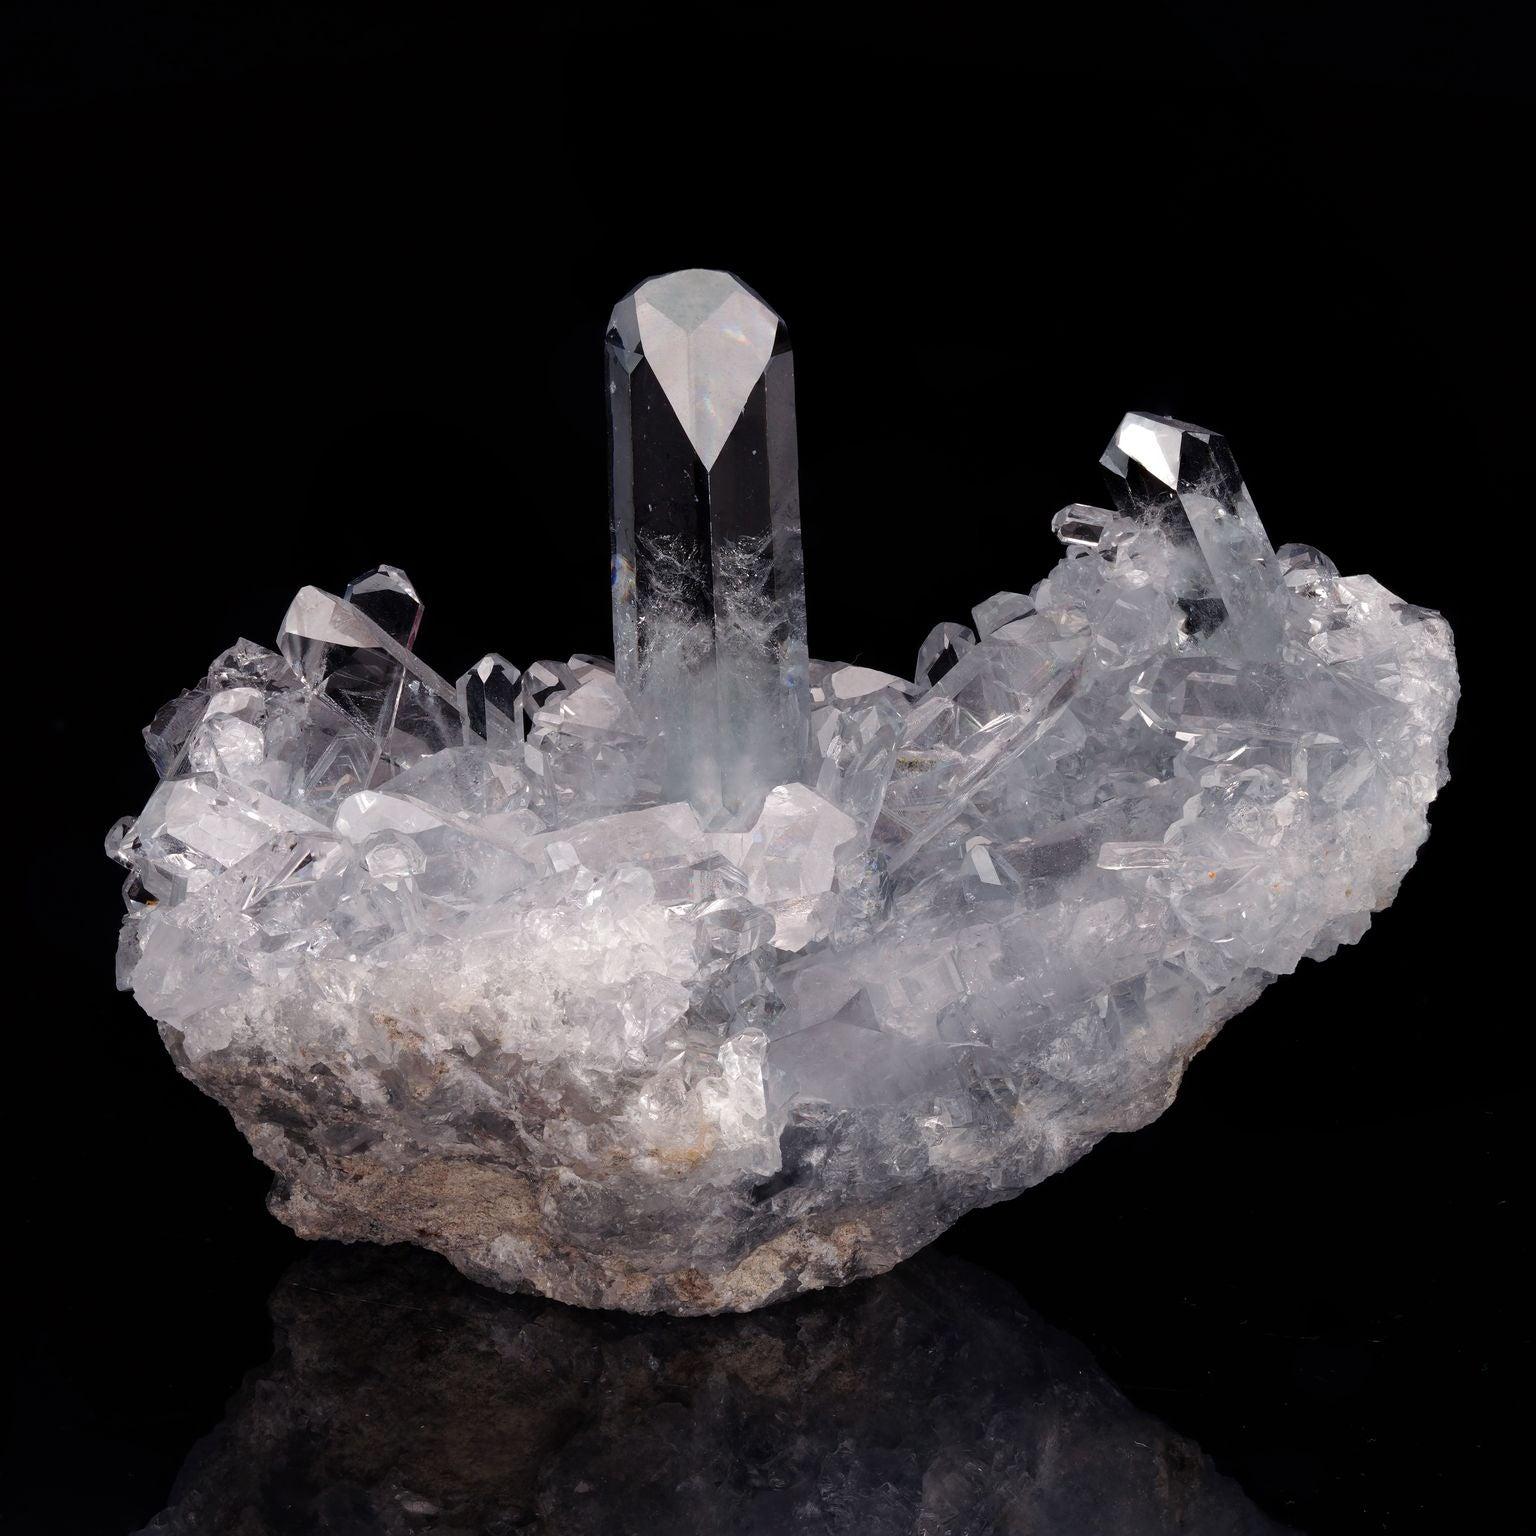 This striking, delicately blue-hued celestite specimen features a bed of incredibly lustrous and clear perfect terminations with several startlingly translucent points rising skyward, including one hefty, almost perfectly centered point offering